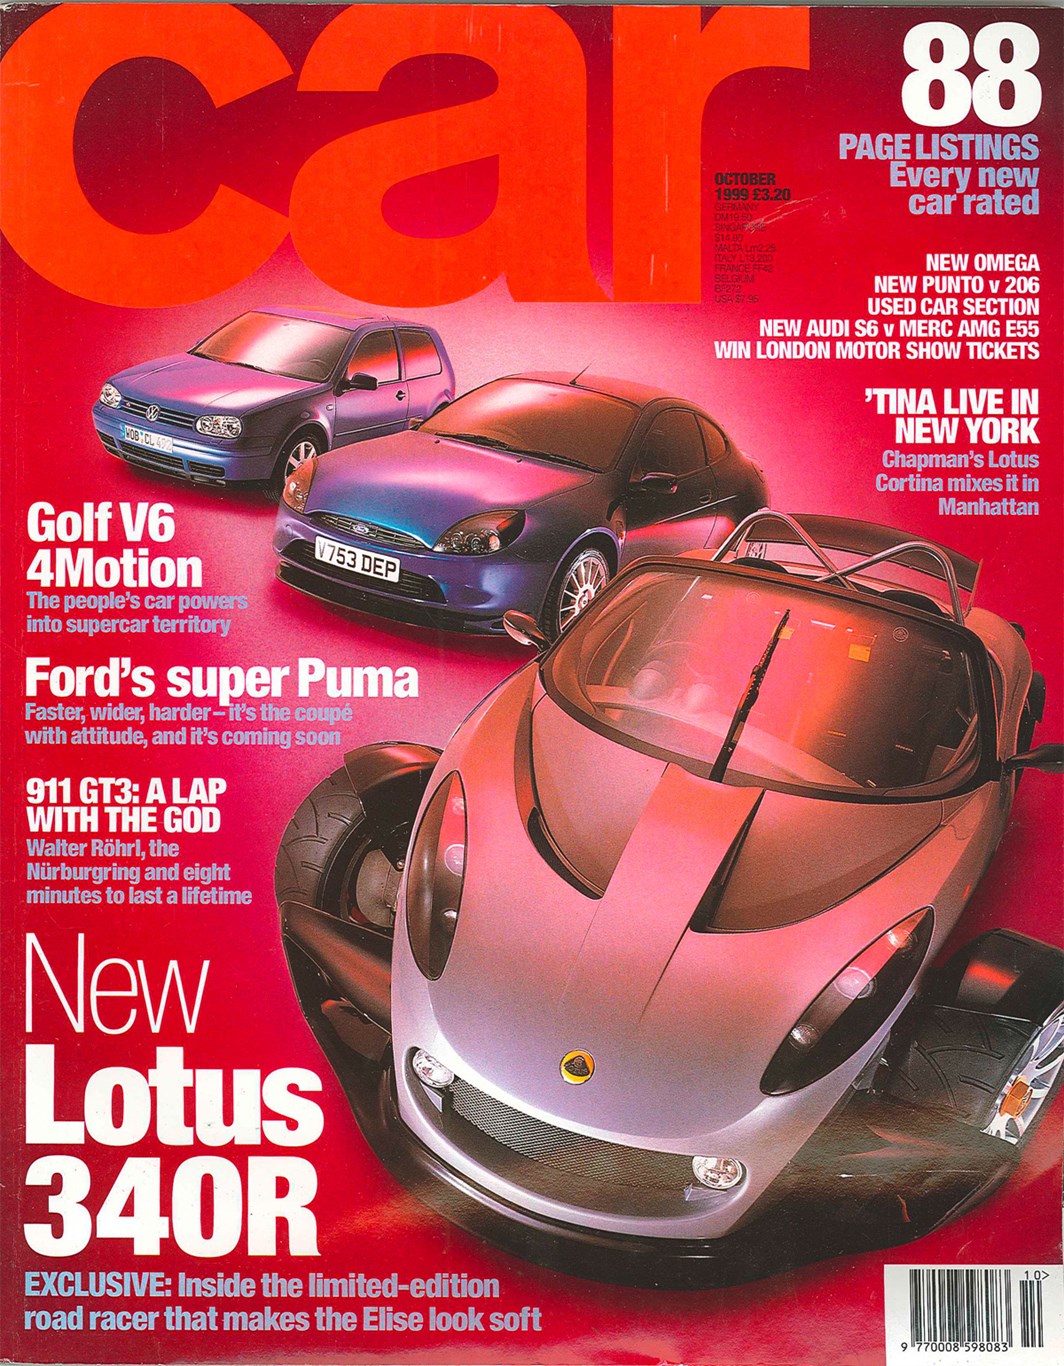 CAR magazine, October 1999: starring the Ford Racing Puma, Lotus 340R and VW Golf V6 4Motion